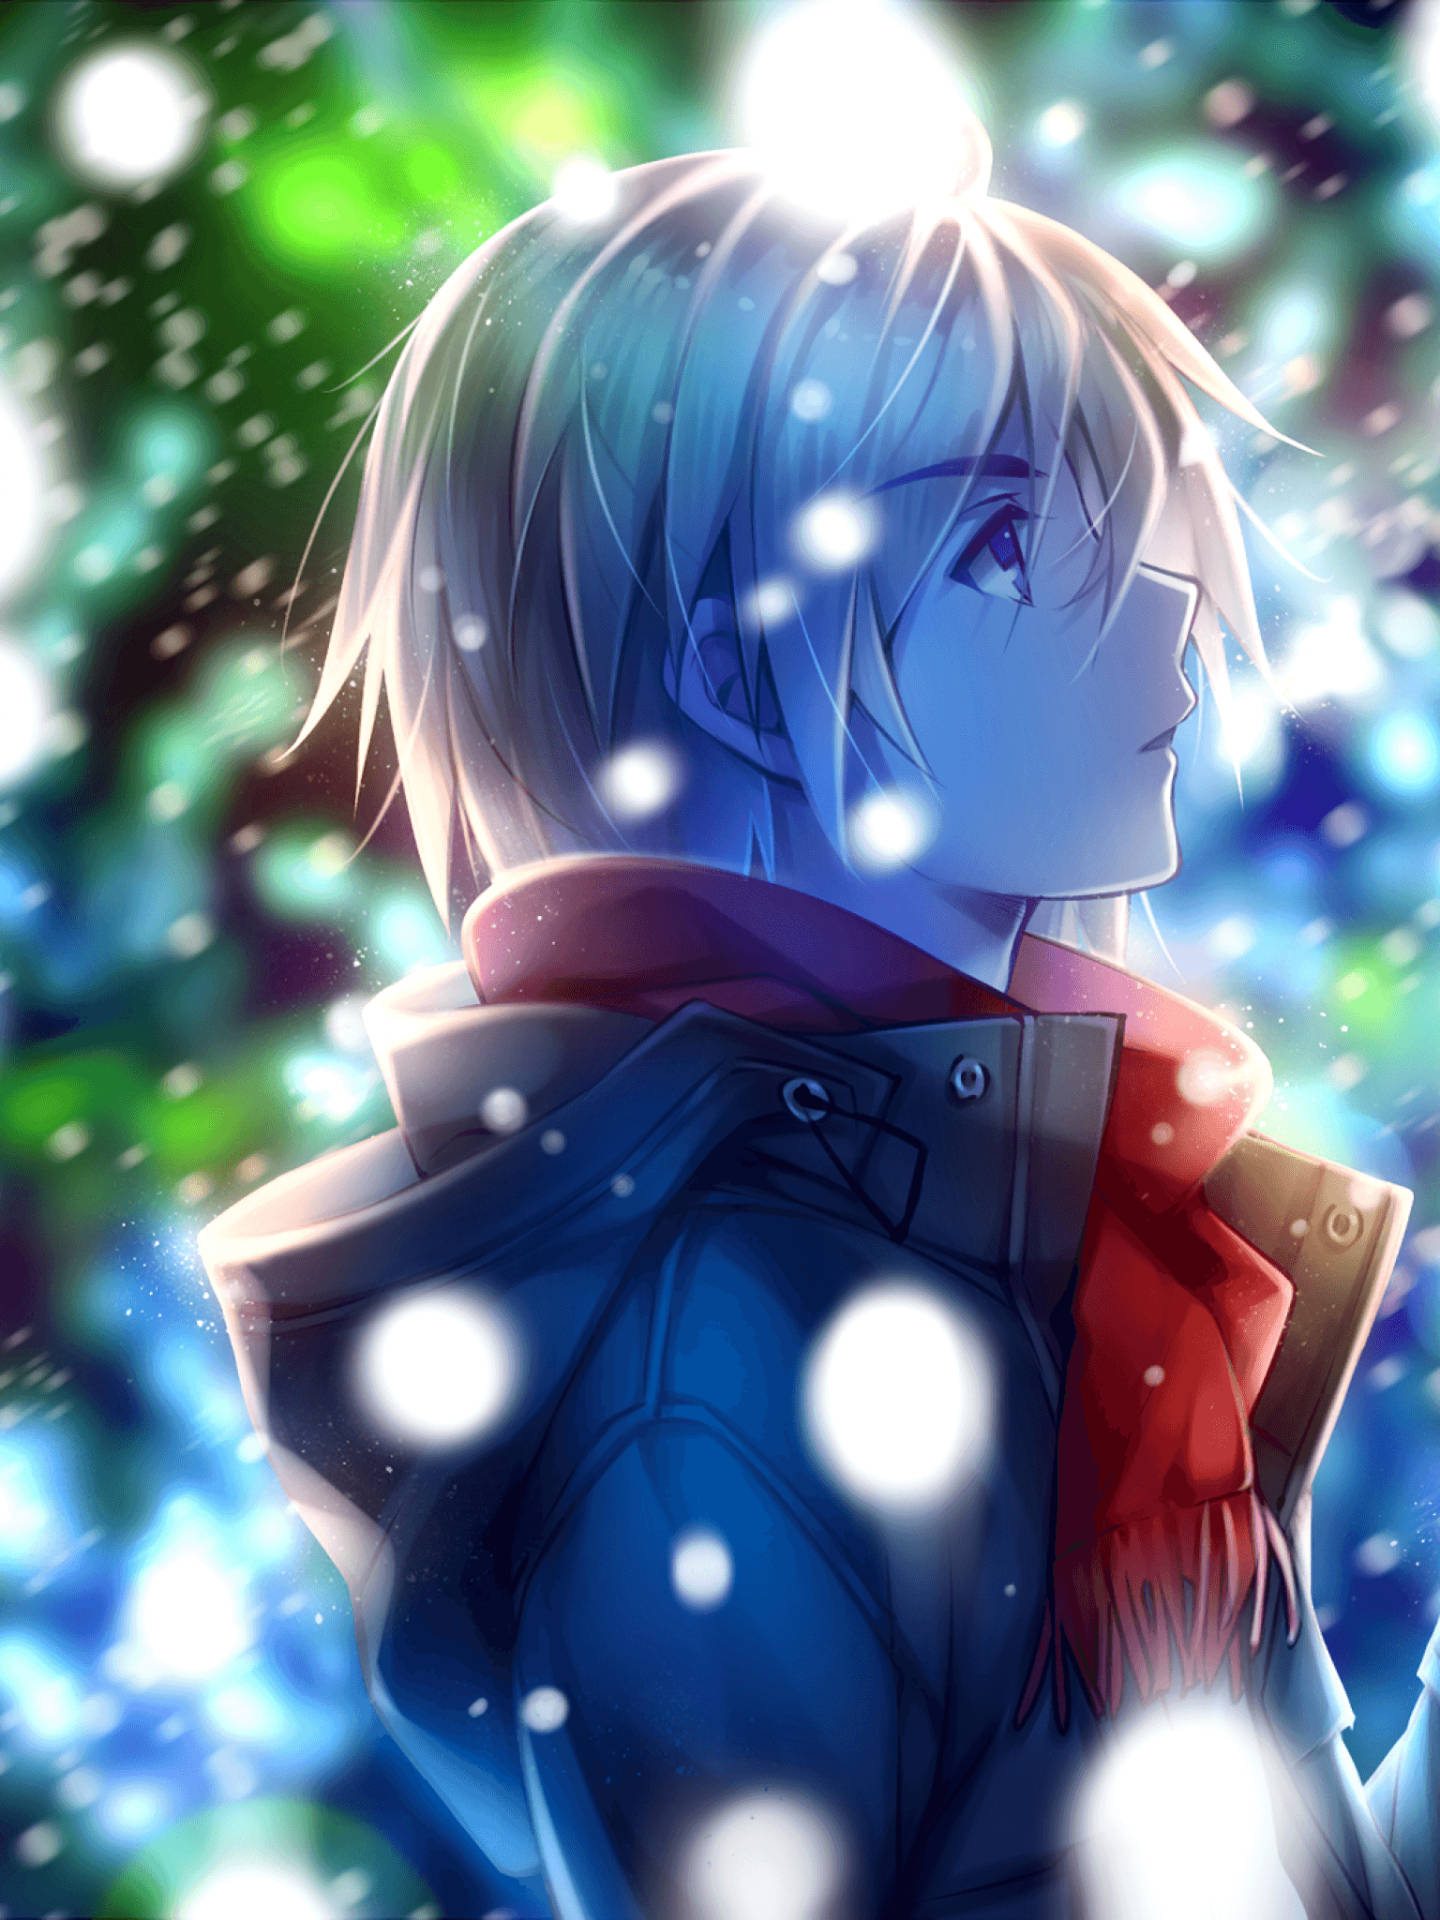 An Anime Guy Looking Sad With His Eyes Closed Background, Cool Pfp  Pictures, Cool Powerpoint, Cool Background Image And Wallpaper for Free  Download